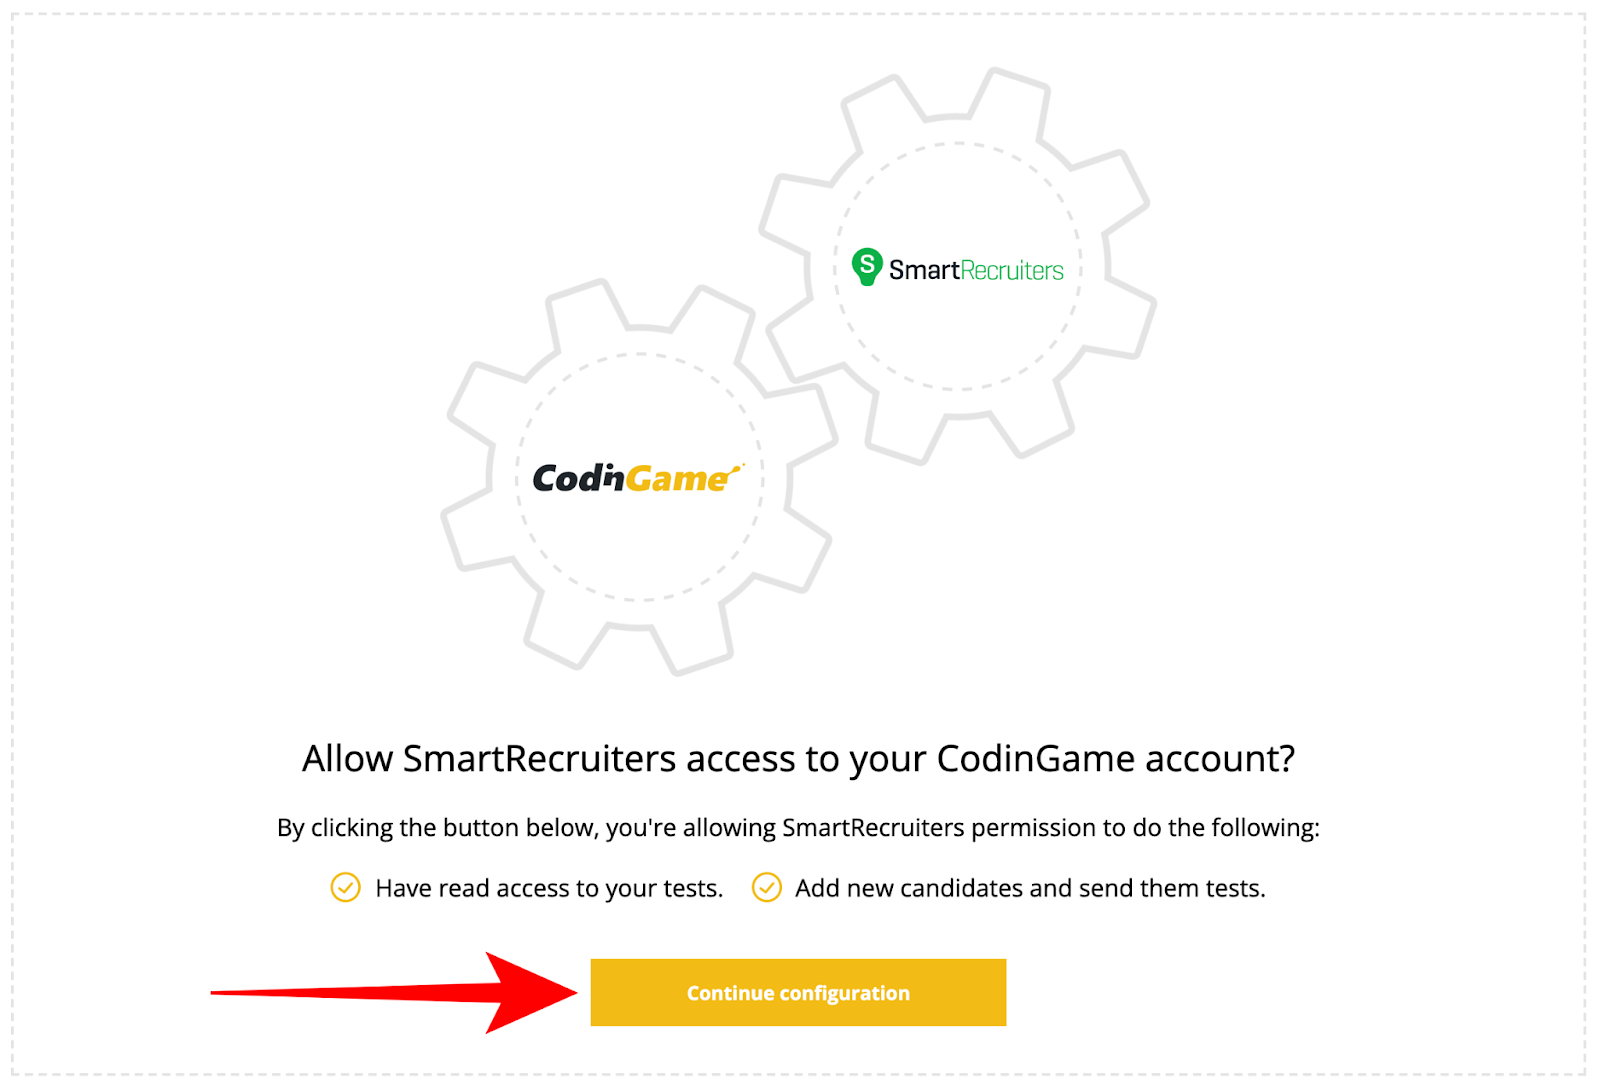 Codingames integration access page with a statement on allowing smartrecruiters persmission and an arrow pointing towards "Continue configuration".